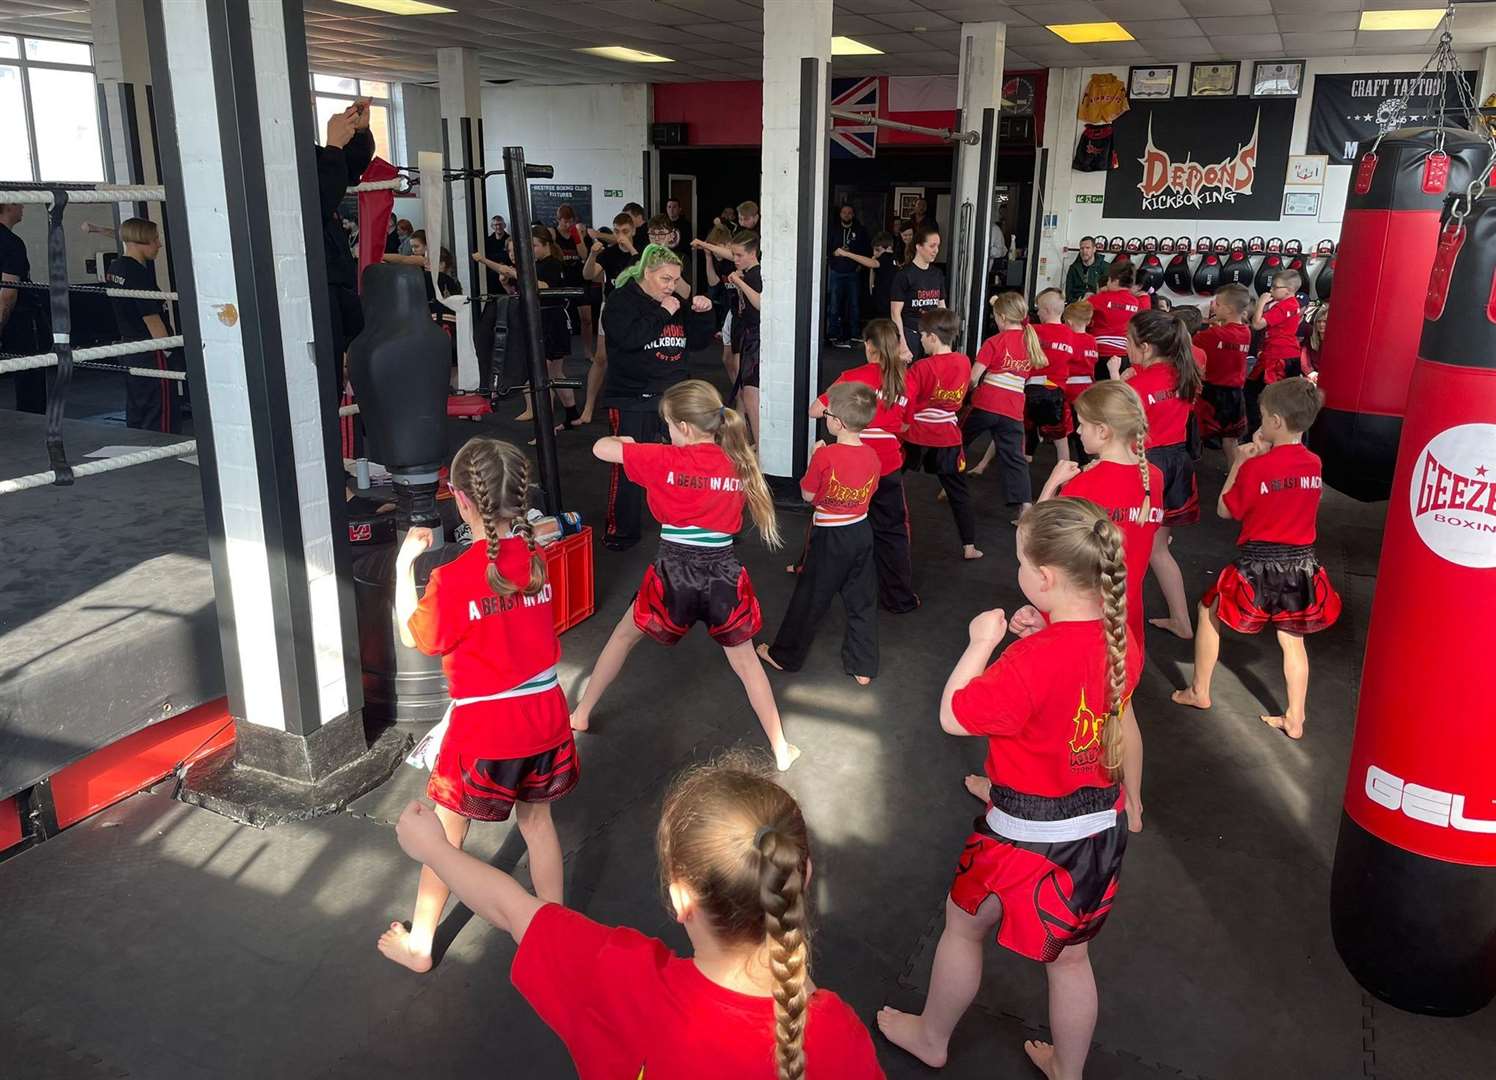 Demons Kickboxing has been running for nearly 20 years. Picture: Denise Elliott